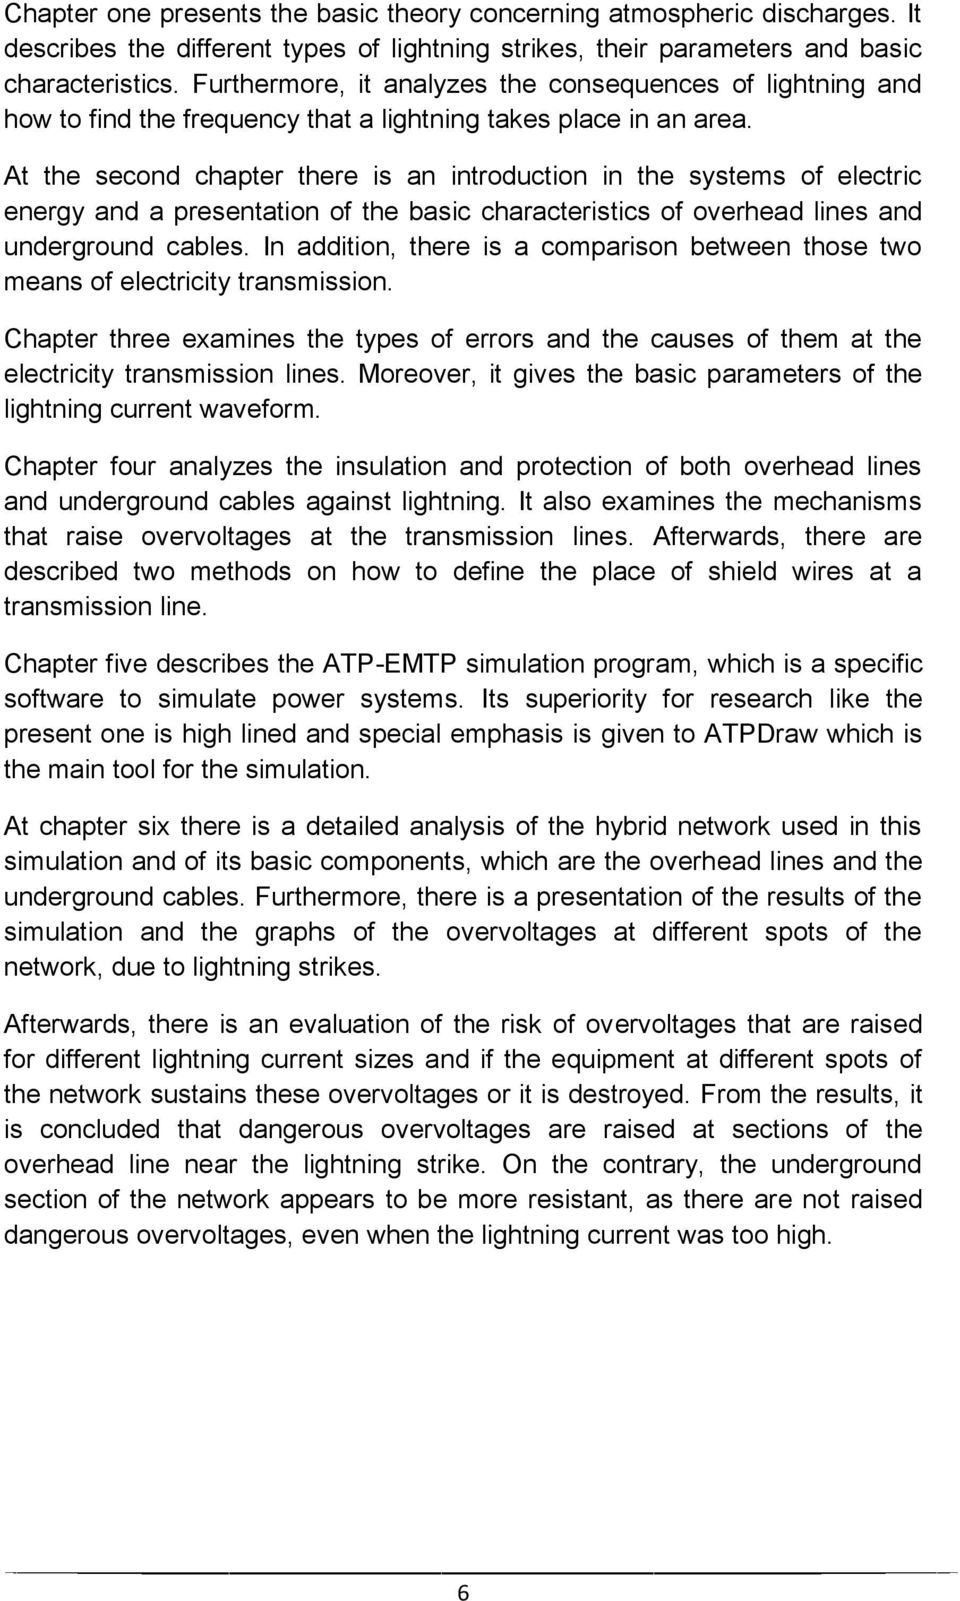 At the second chapter there is an introduction in the systems of electric energy and a presentation of the basic characteristics of overhead lines and underground cables.